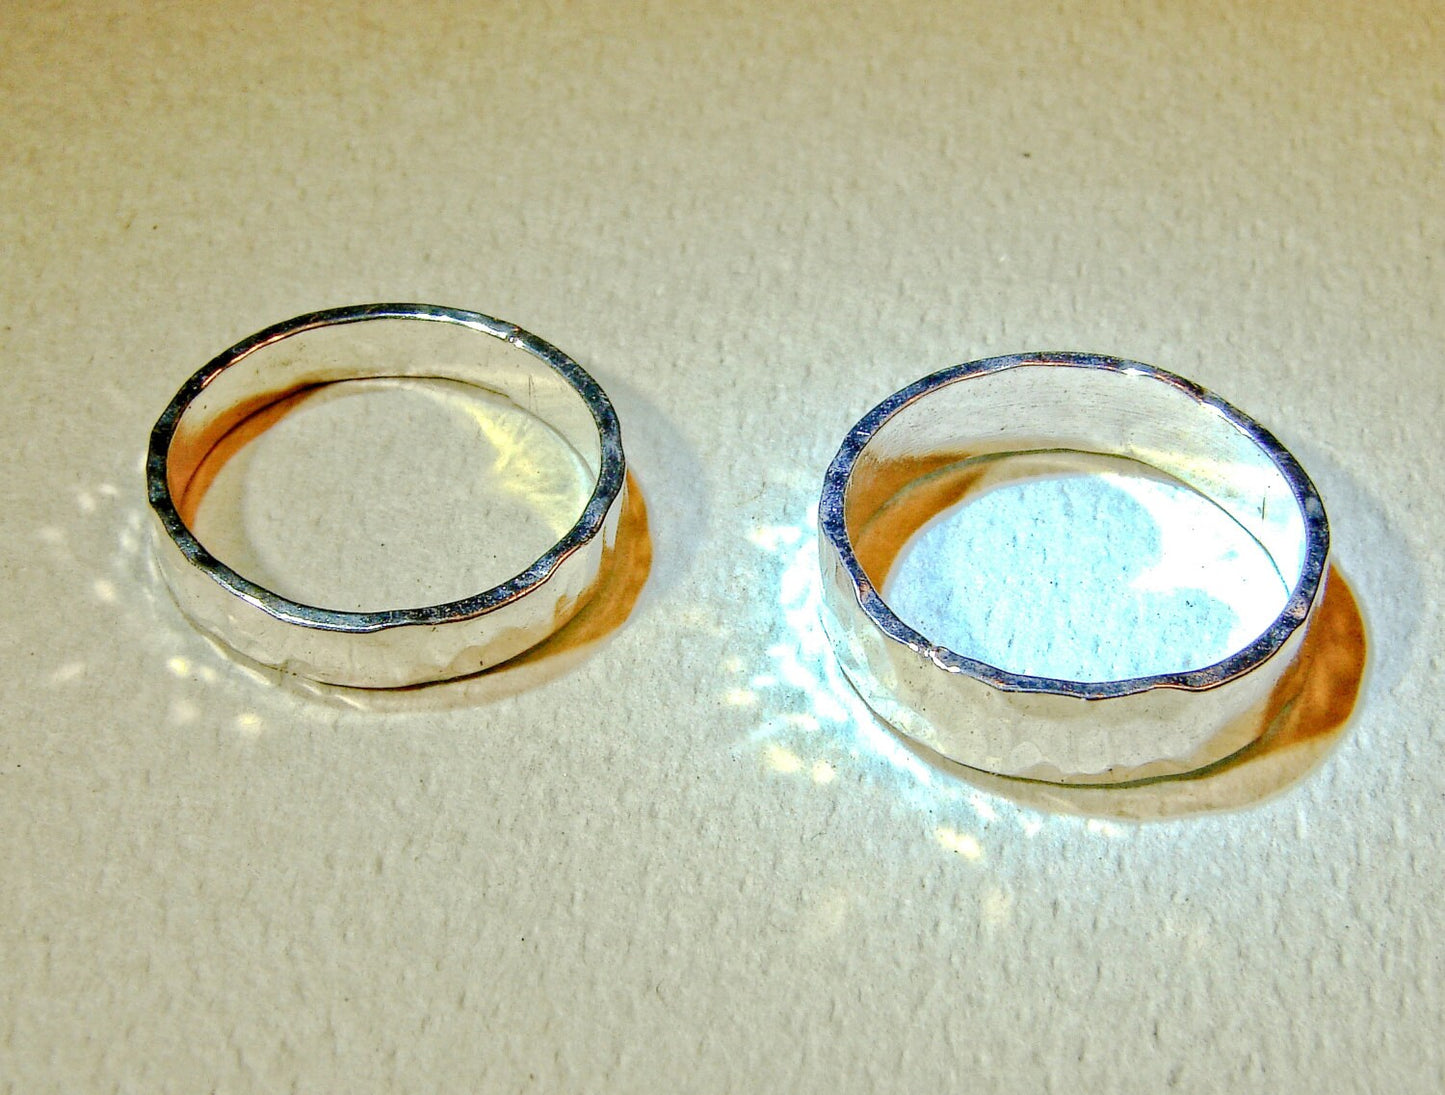 Hammered sterling silver ring set or weddings bands with the ability to customize